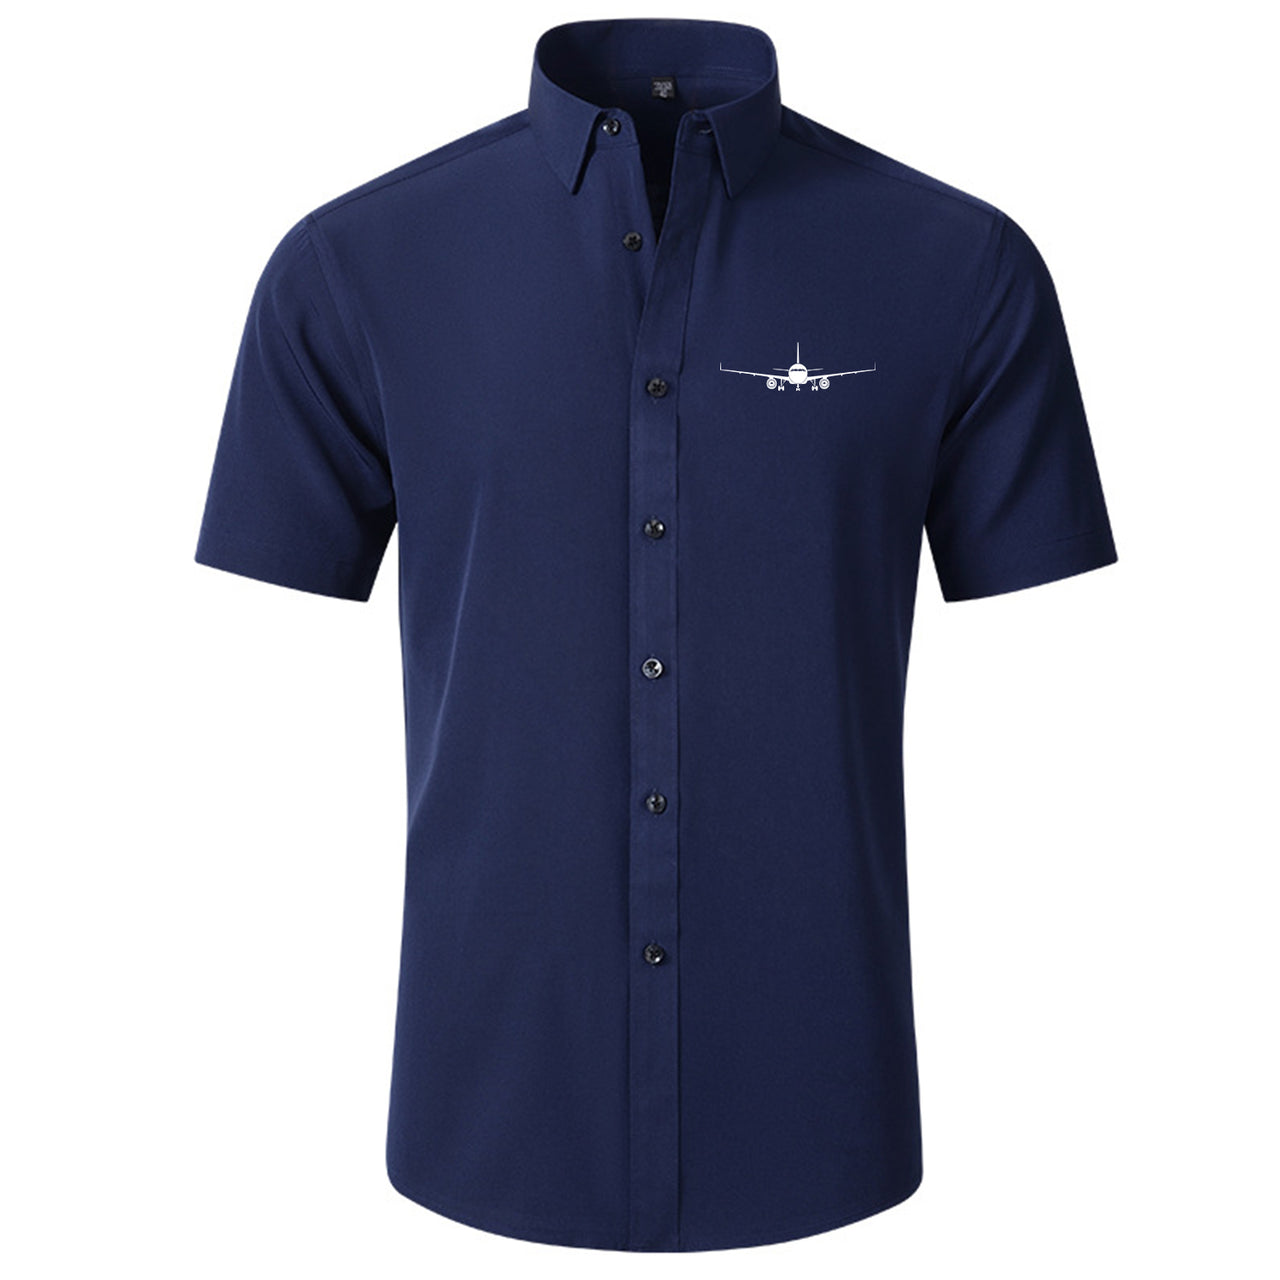 Airbus A320 Silhouette Designed Short Sleeve Shirts